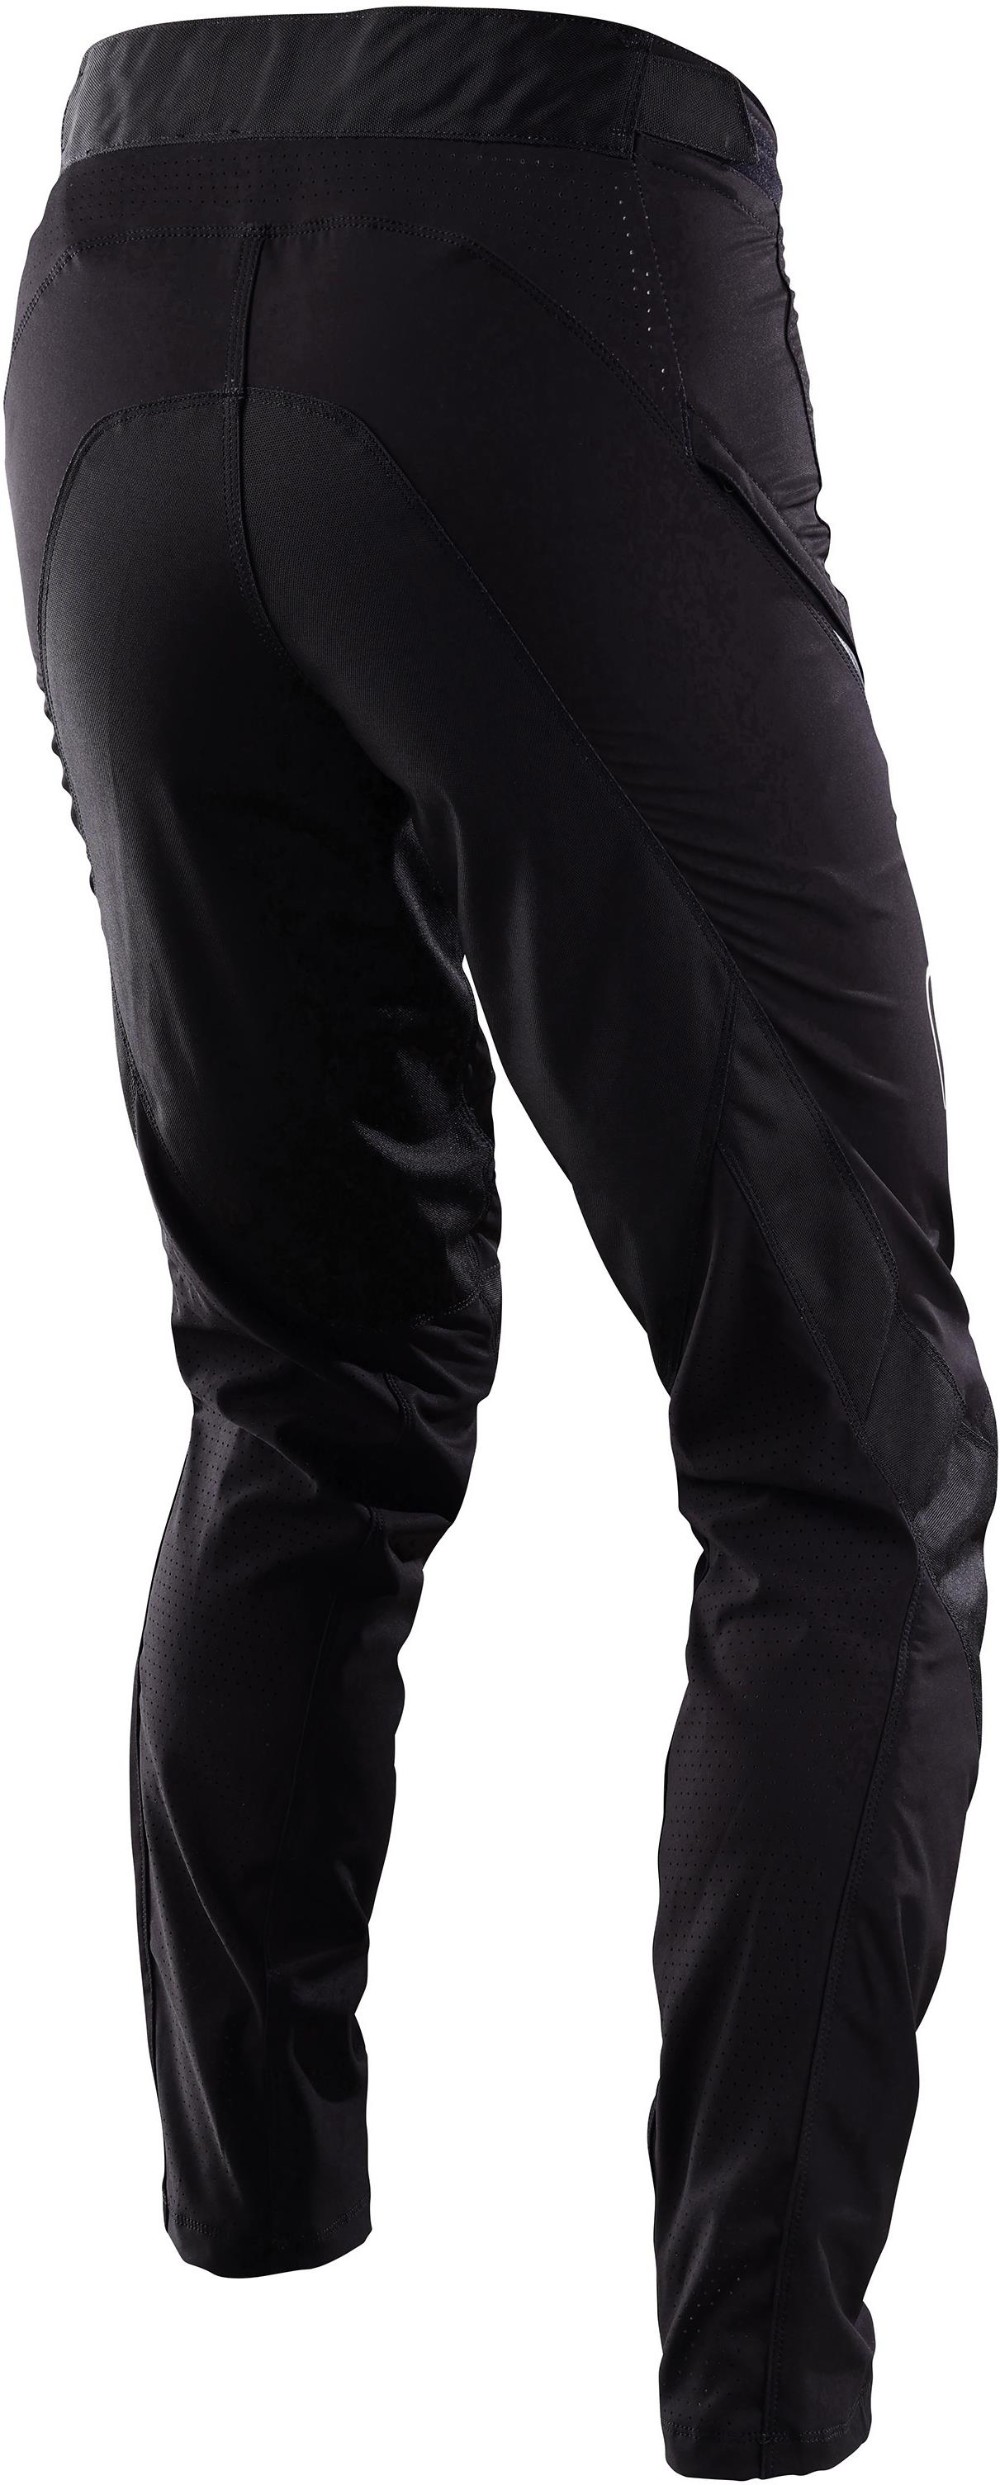 Sprint MTB Cycling Trousers image 1